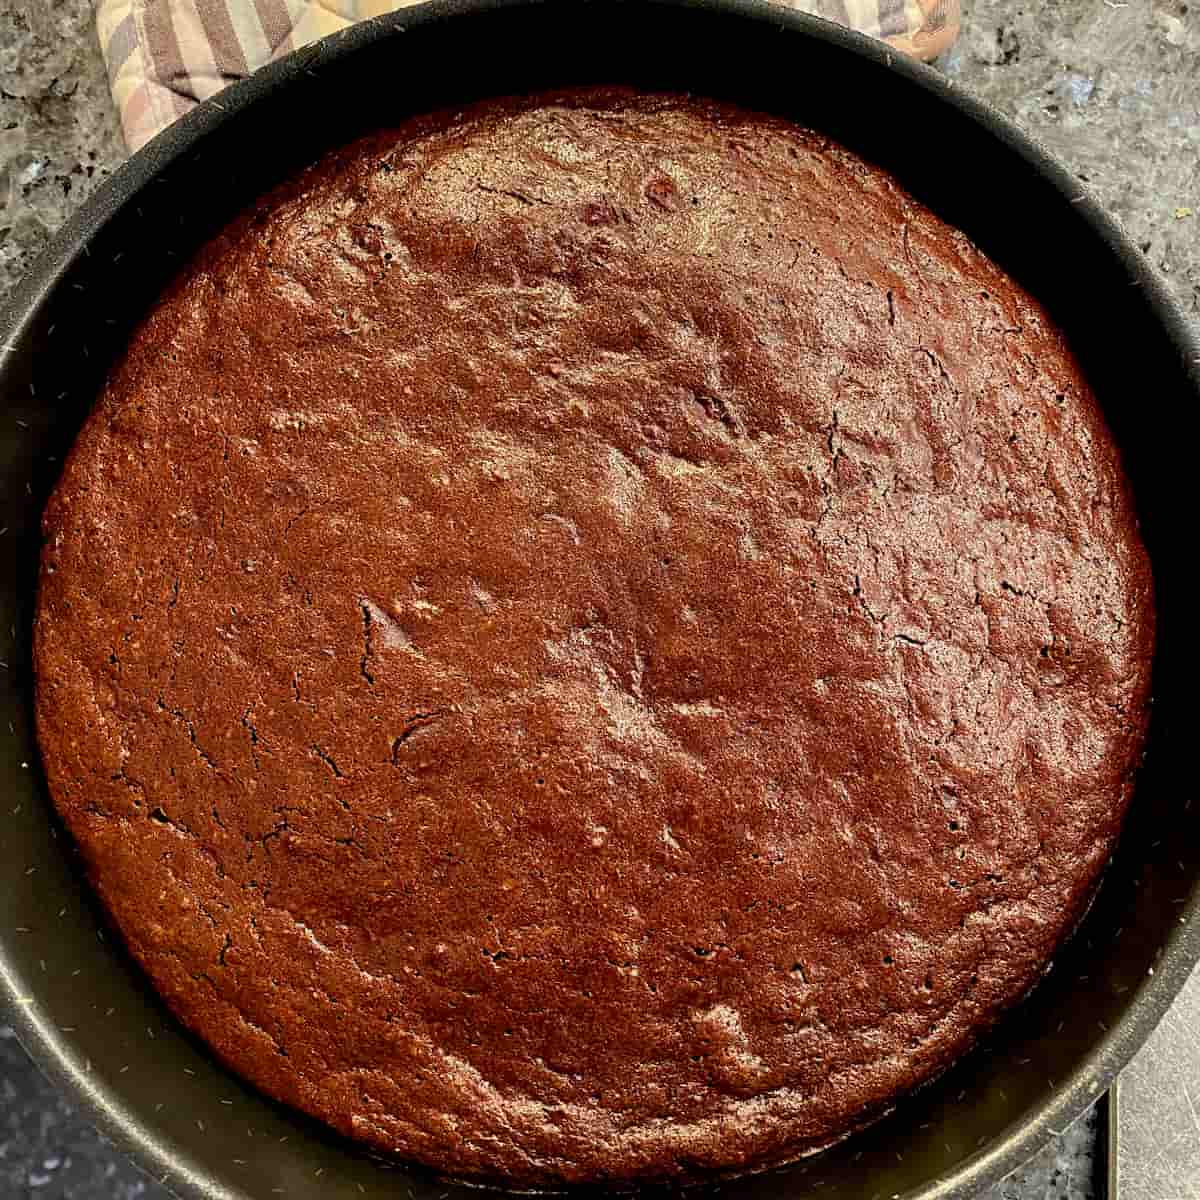 perfectly round and flat chocolate cake in metal tin just out of the oven